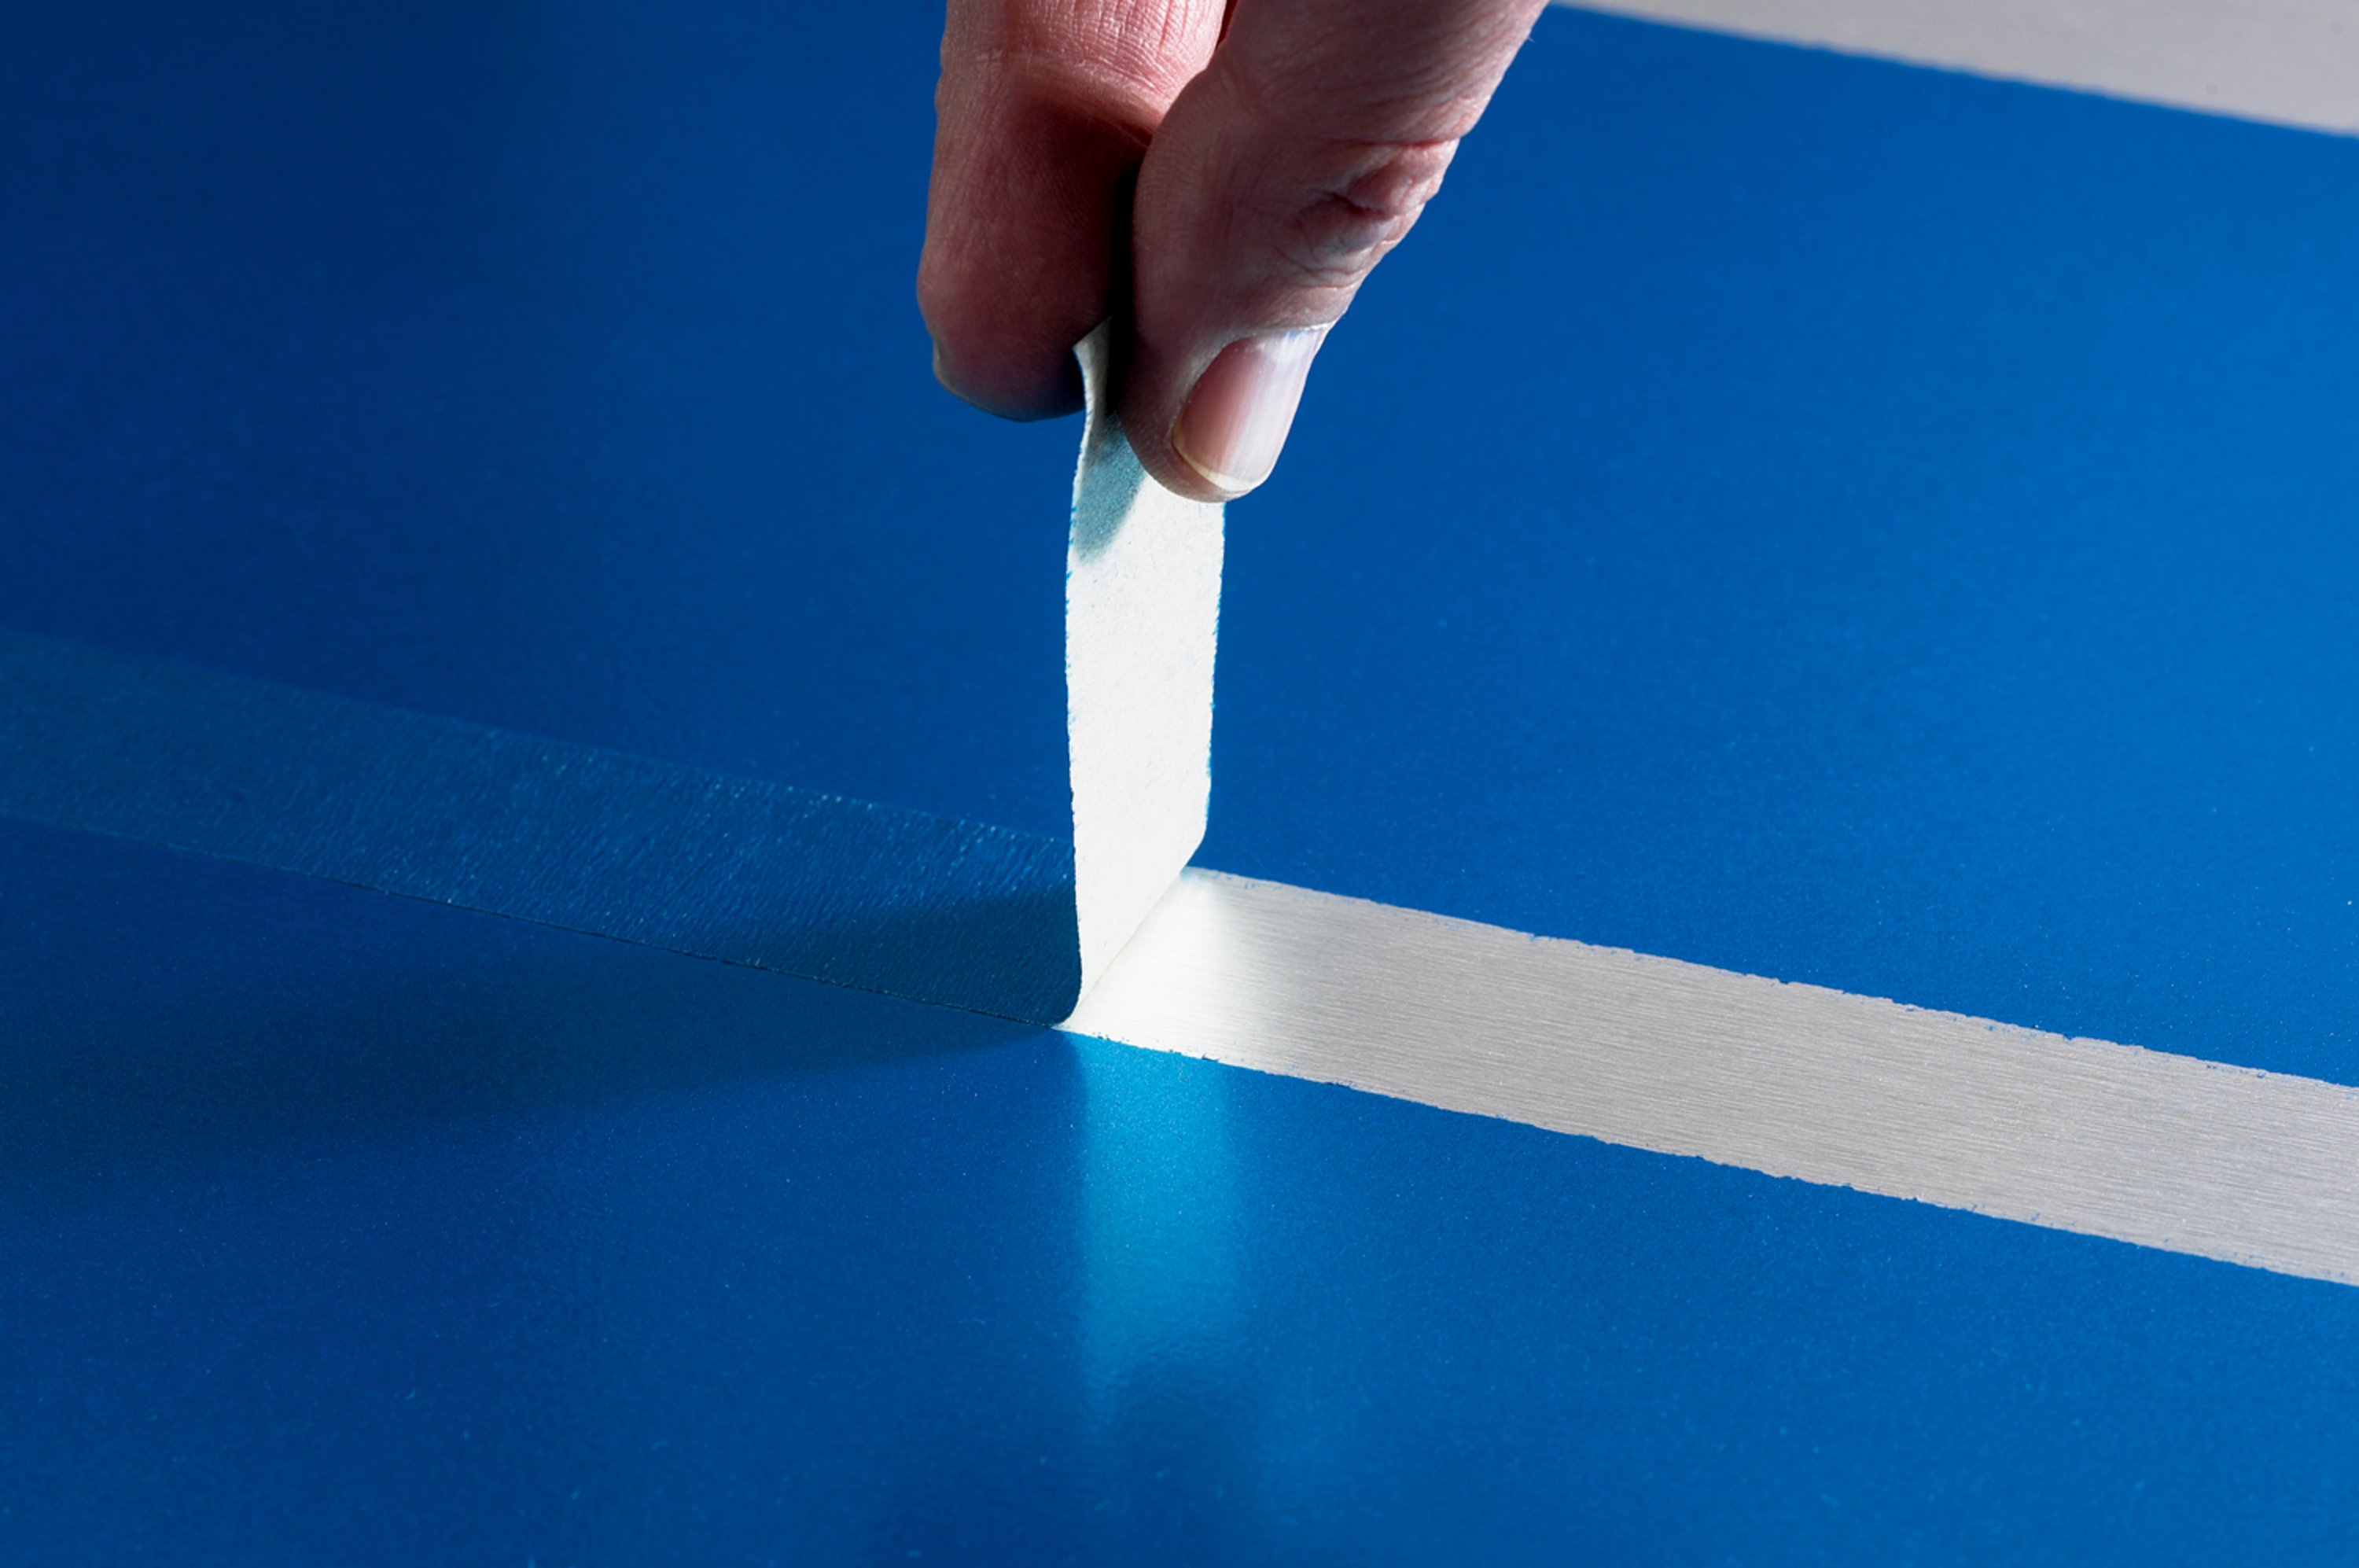 3M™ High Performance Masking Tape 2693 performs very well in large scale paint masking applications, offering some the best holding power and heat resistance while proving to be among the easiest to unwind.